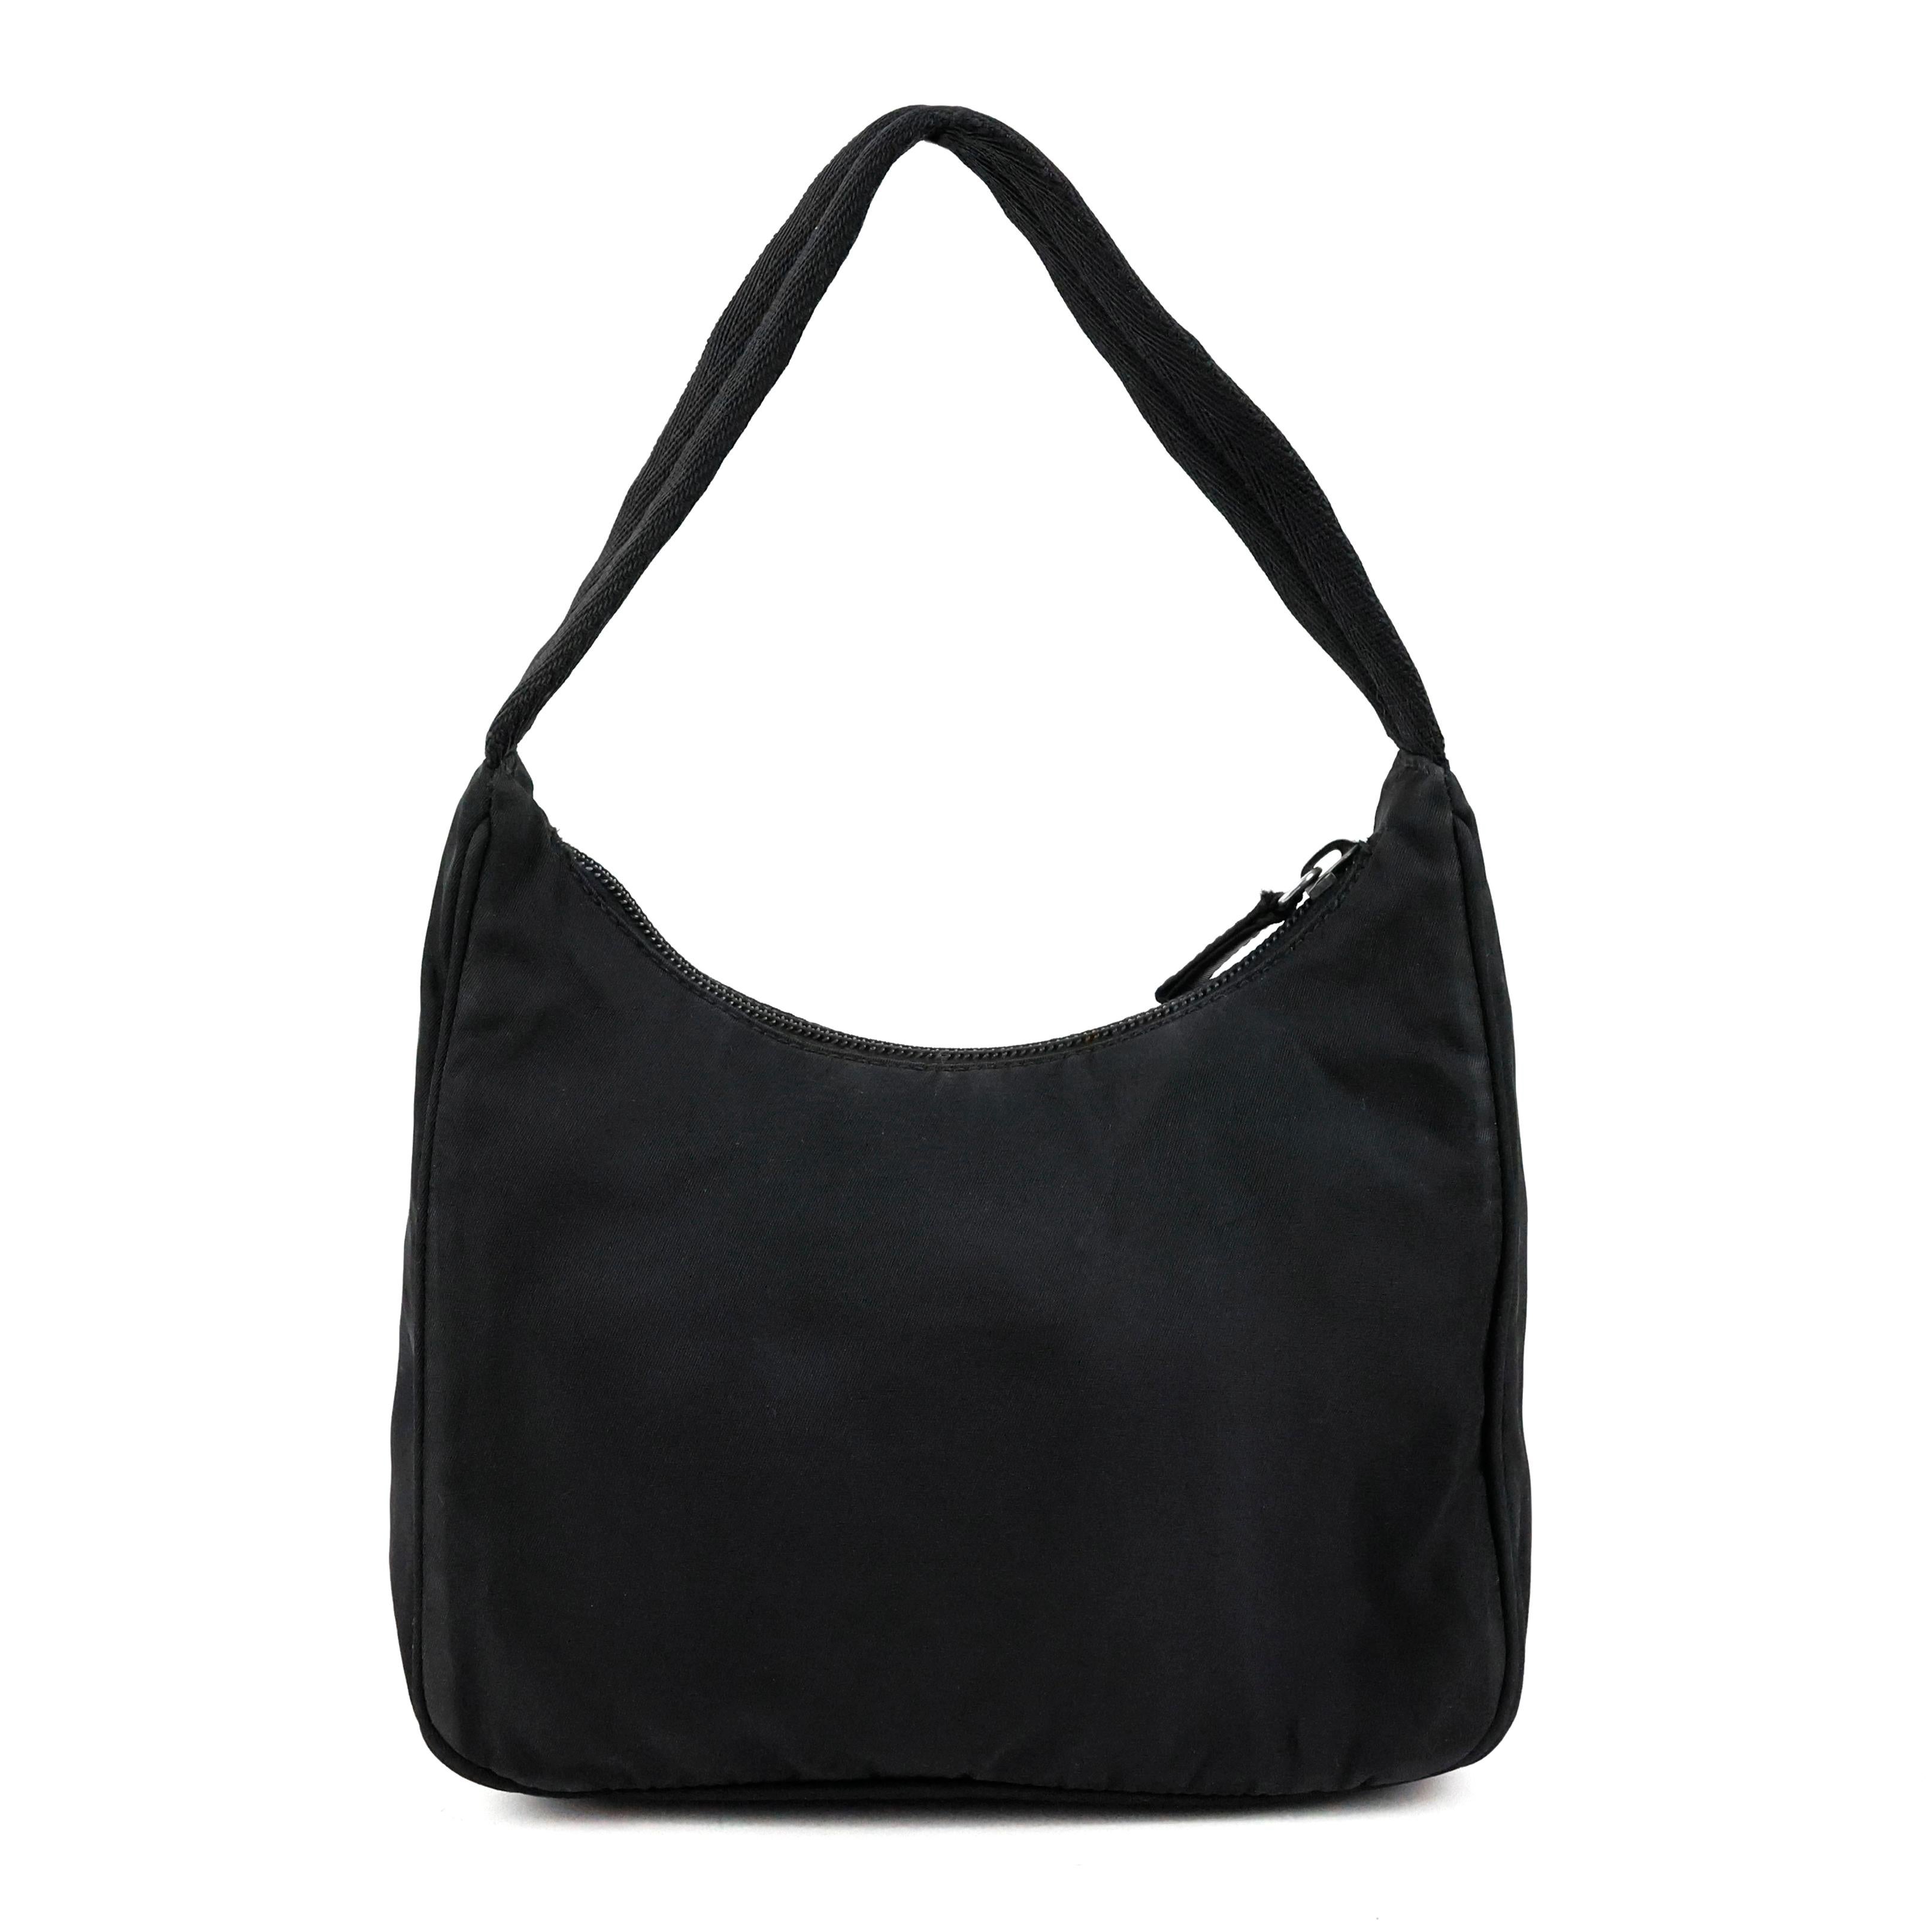 Prada re-edition 2000 mini hobo bag in tessuto color black.


Condition:
Really good.


Packing/accessories:
Dustbag, authenticity card.


Measurements:
20cm x 14cm x 7cm